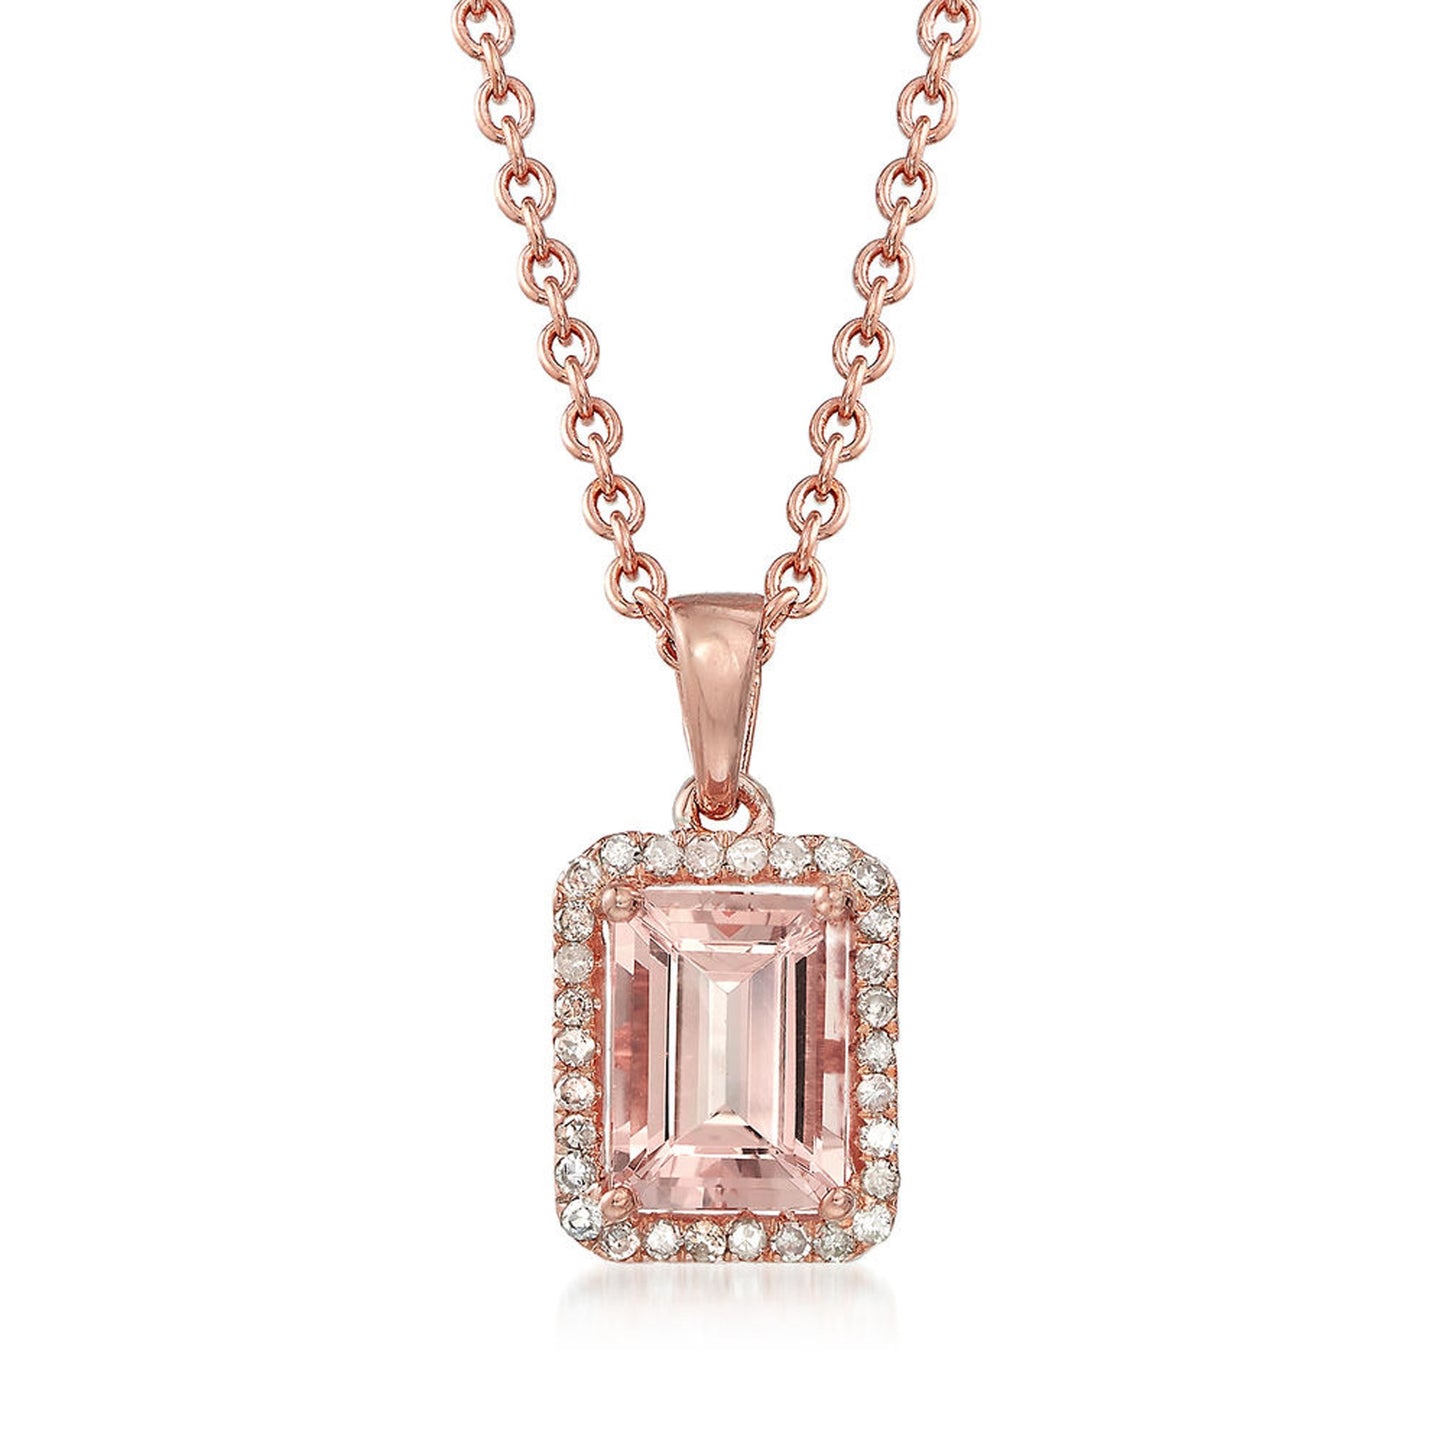 Morganite With Diamond Gemstone Pendant, 925 Sterling Silver Over Rose Gold Plated Pendant, Pendant With 18 Inches Chain, Gift For Her